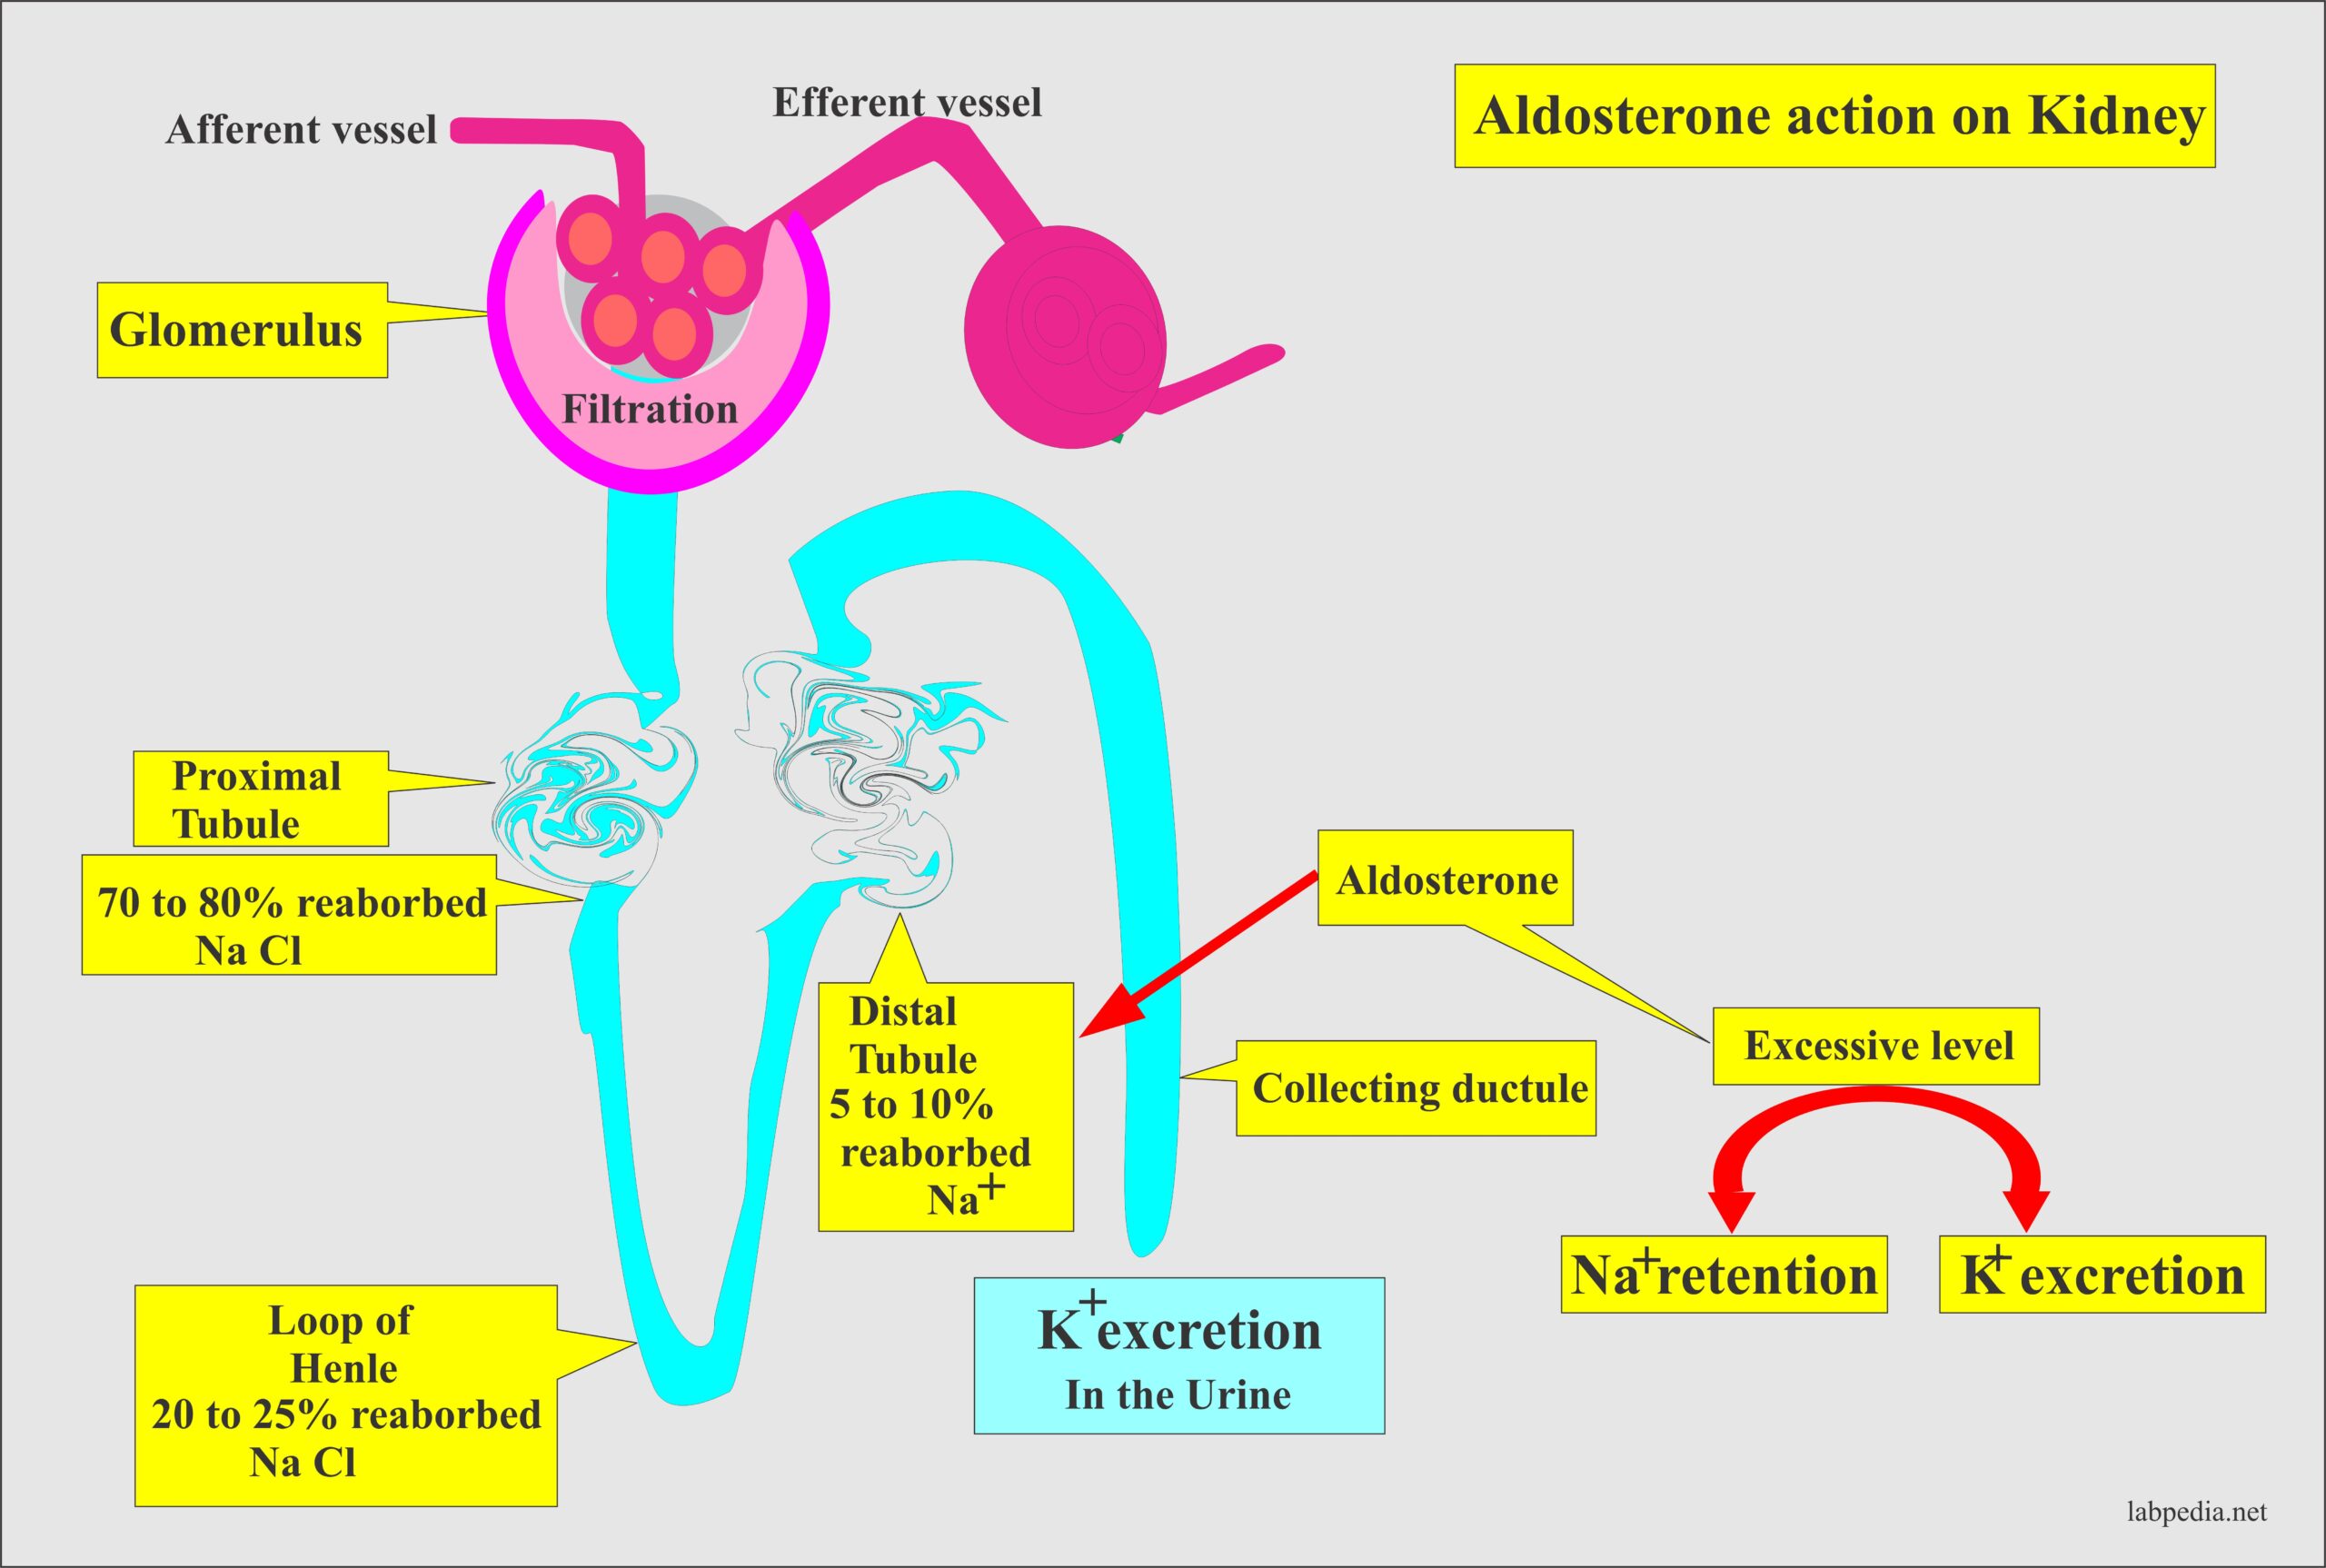 Aldosterone role on kidneys, regulate Na+ absorption and its excretion